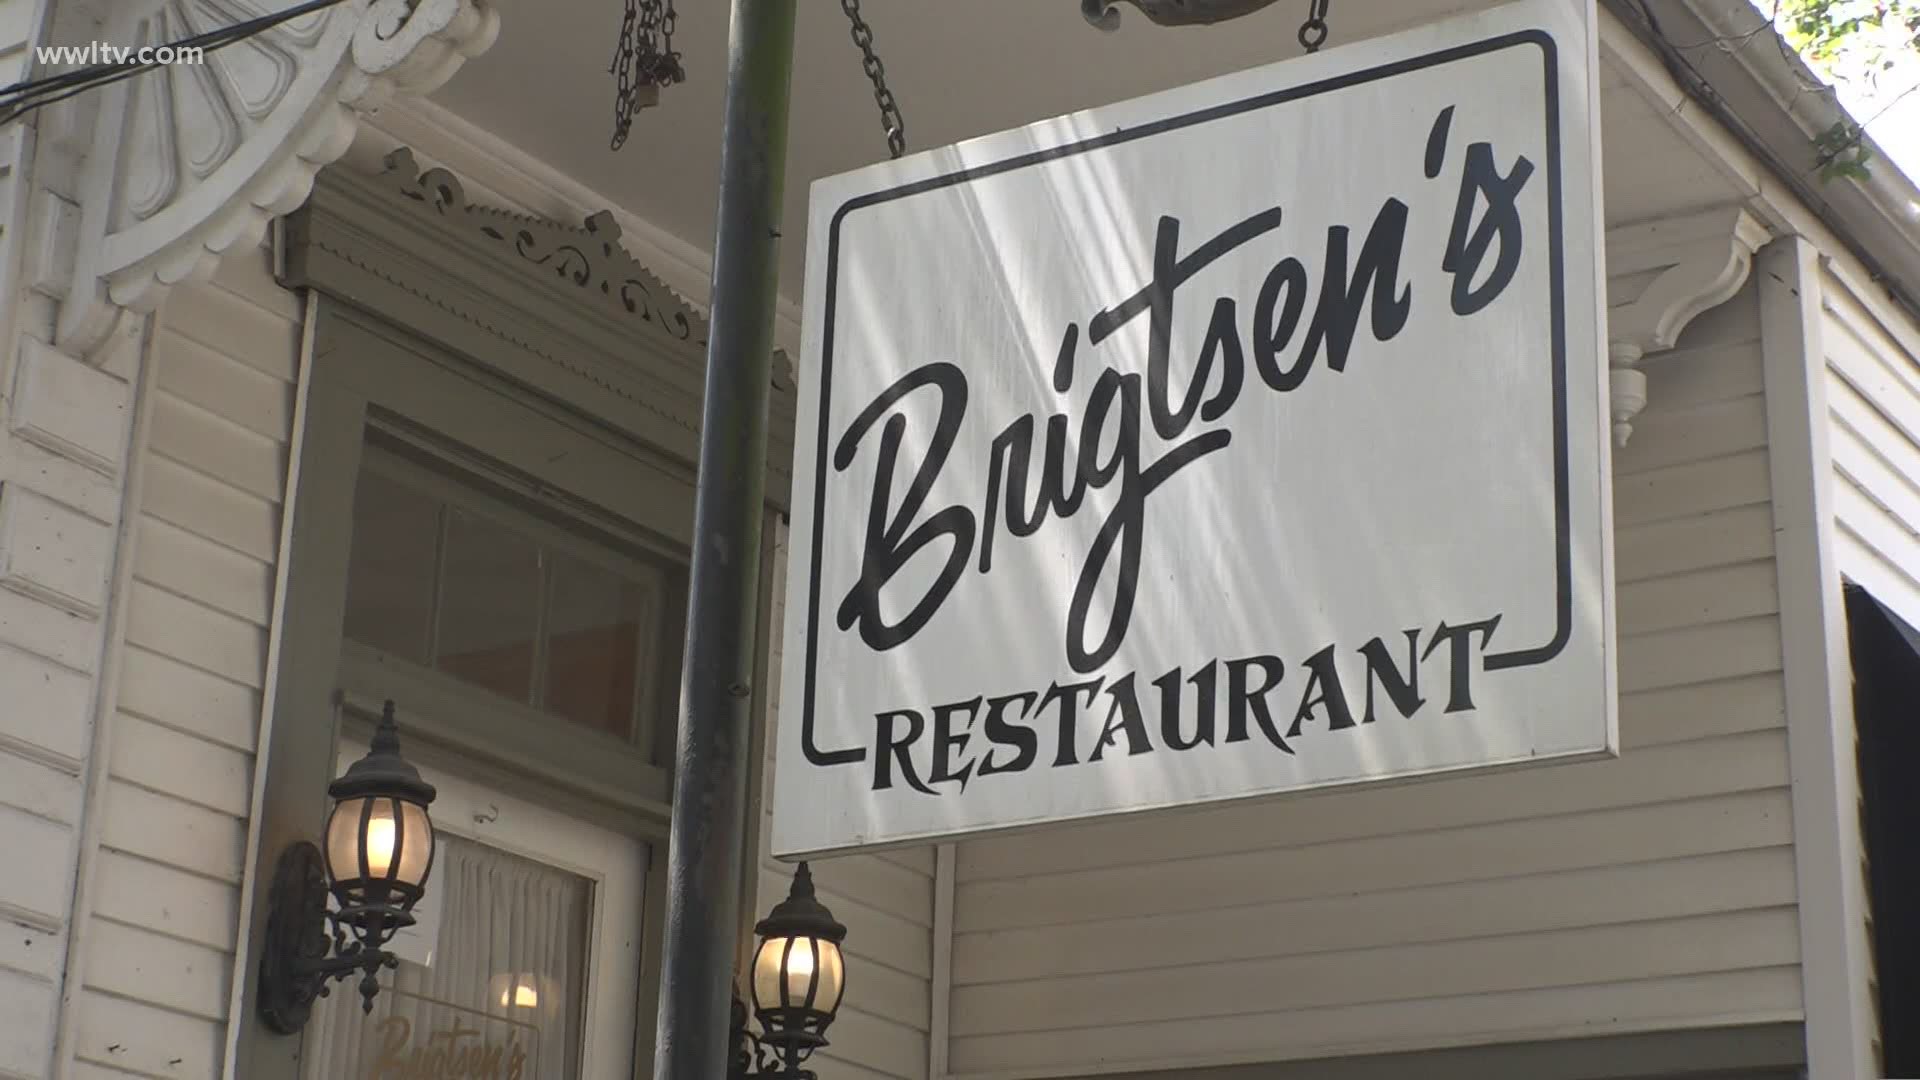 Award winning chef and owner Frank Brigtsen said he saw federal unemployment benefits running out for his staff and knew he had to do something.